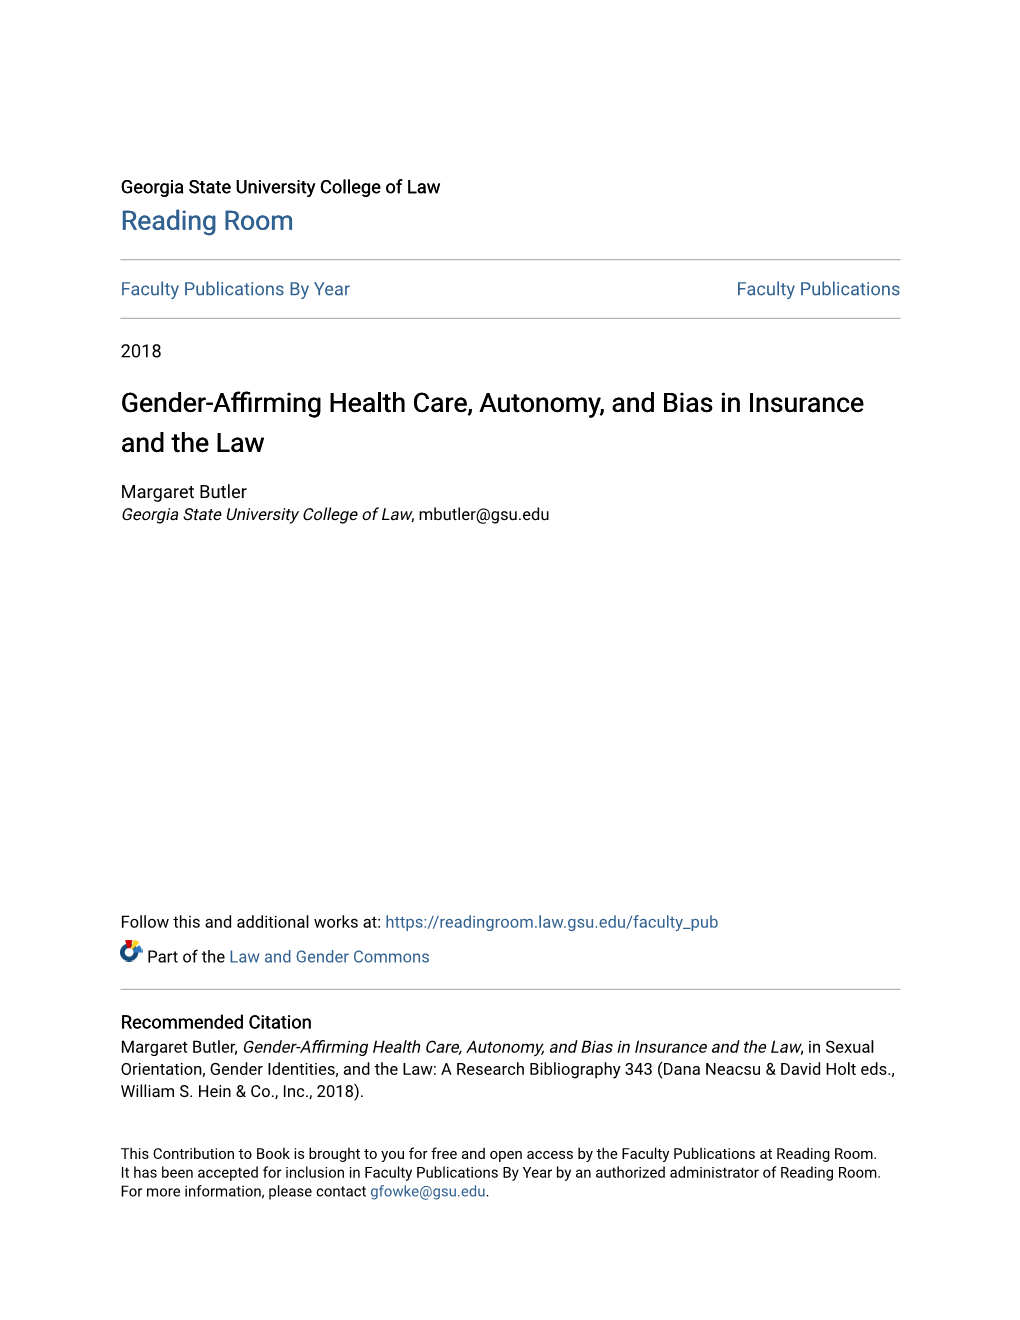 Gender-Affirming Health Care, Autonomy, and Bias in Insurance and the Law